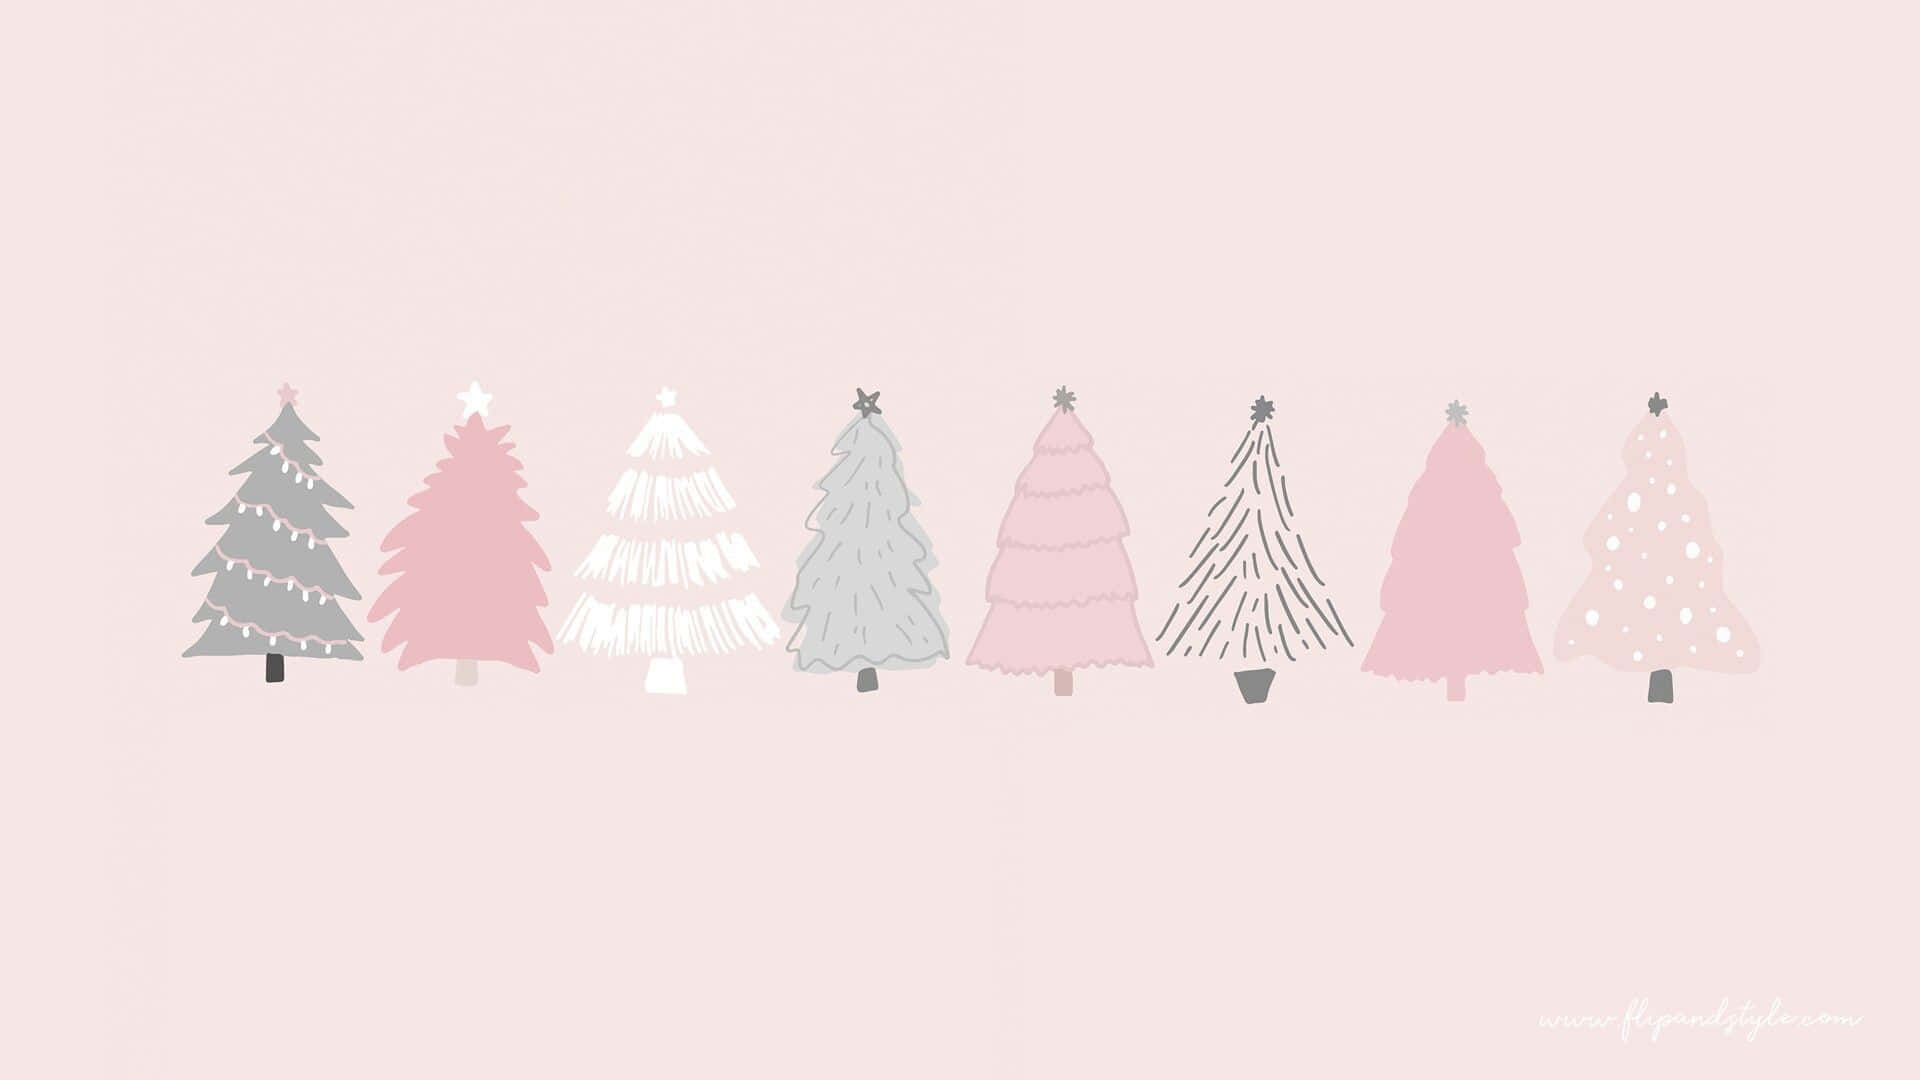 Celebrate this holiday season with a festive Mac Aesthetic Wallpaper